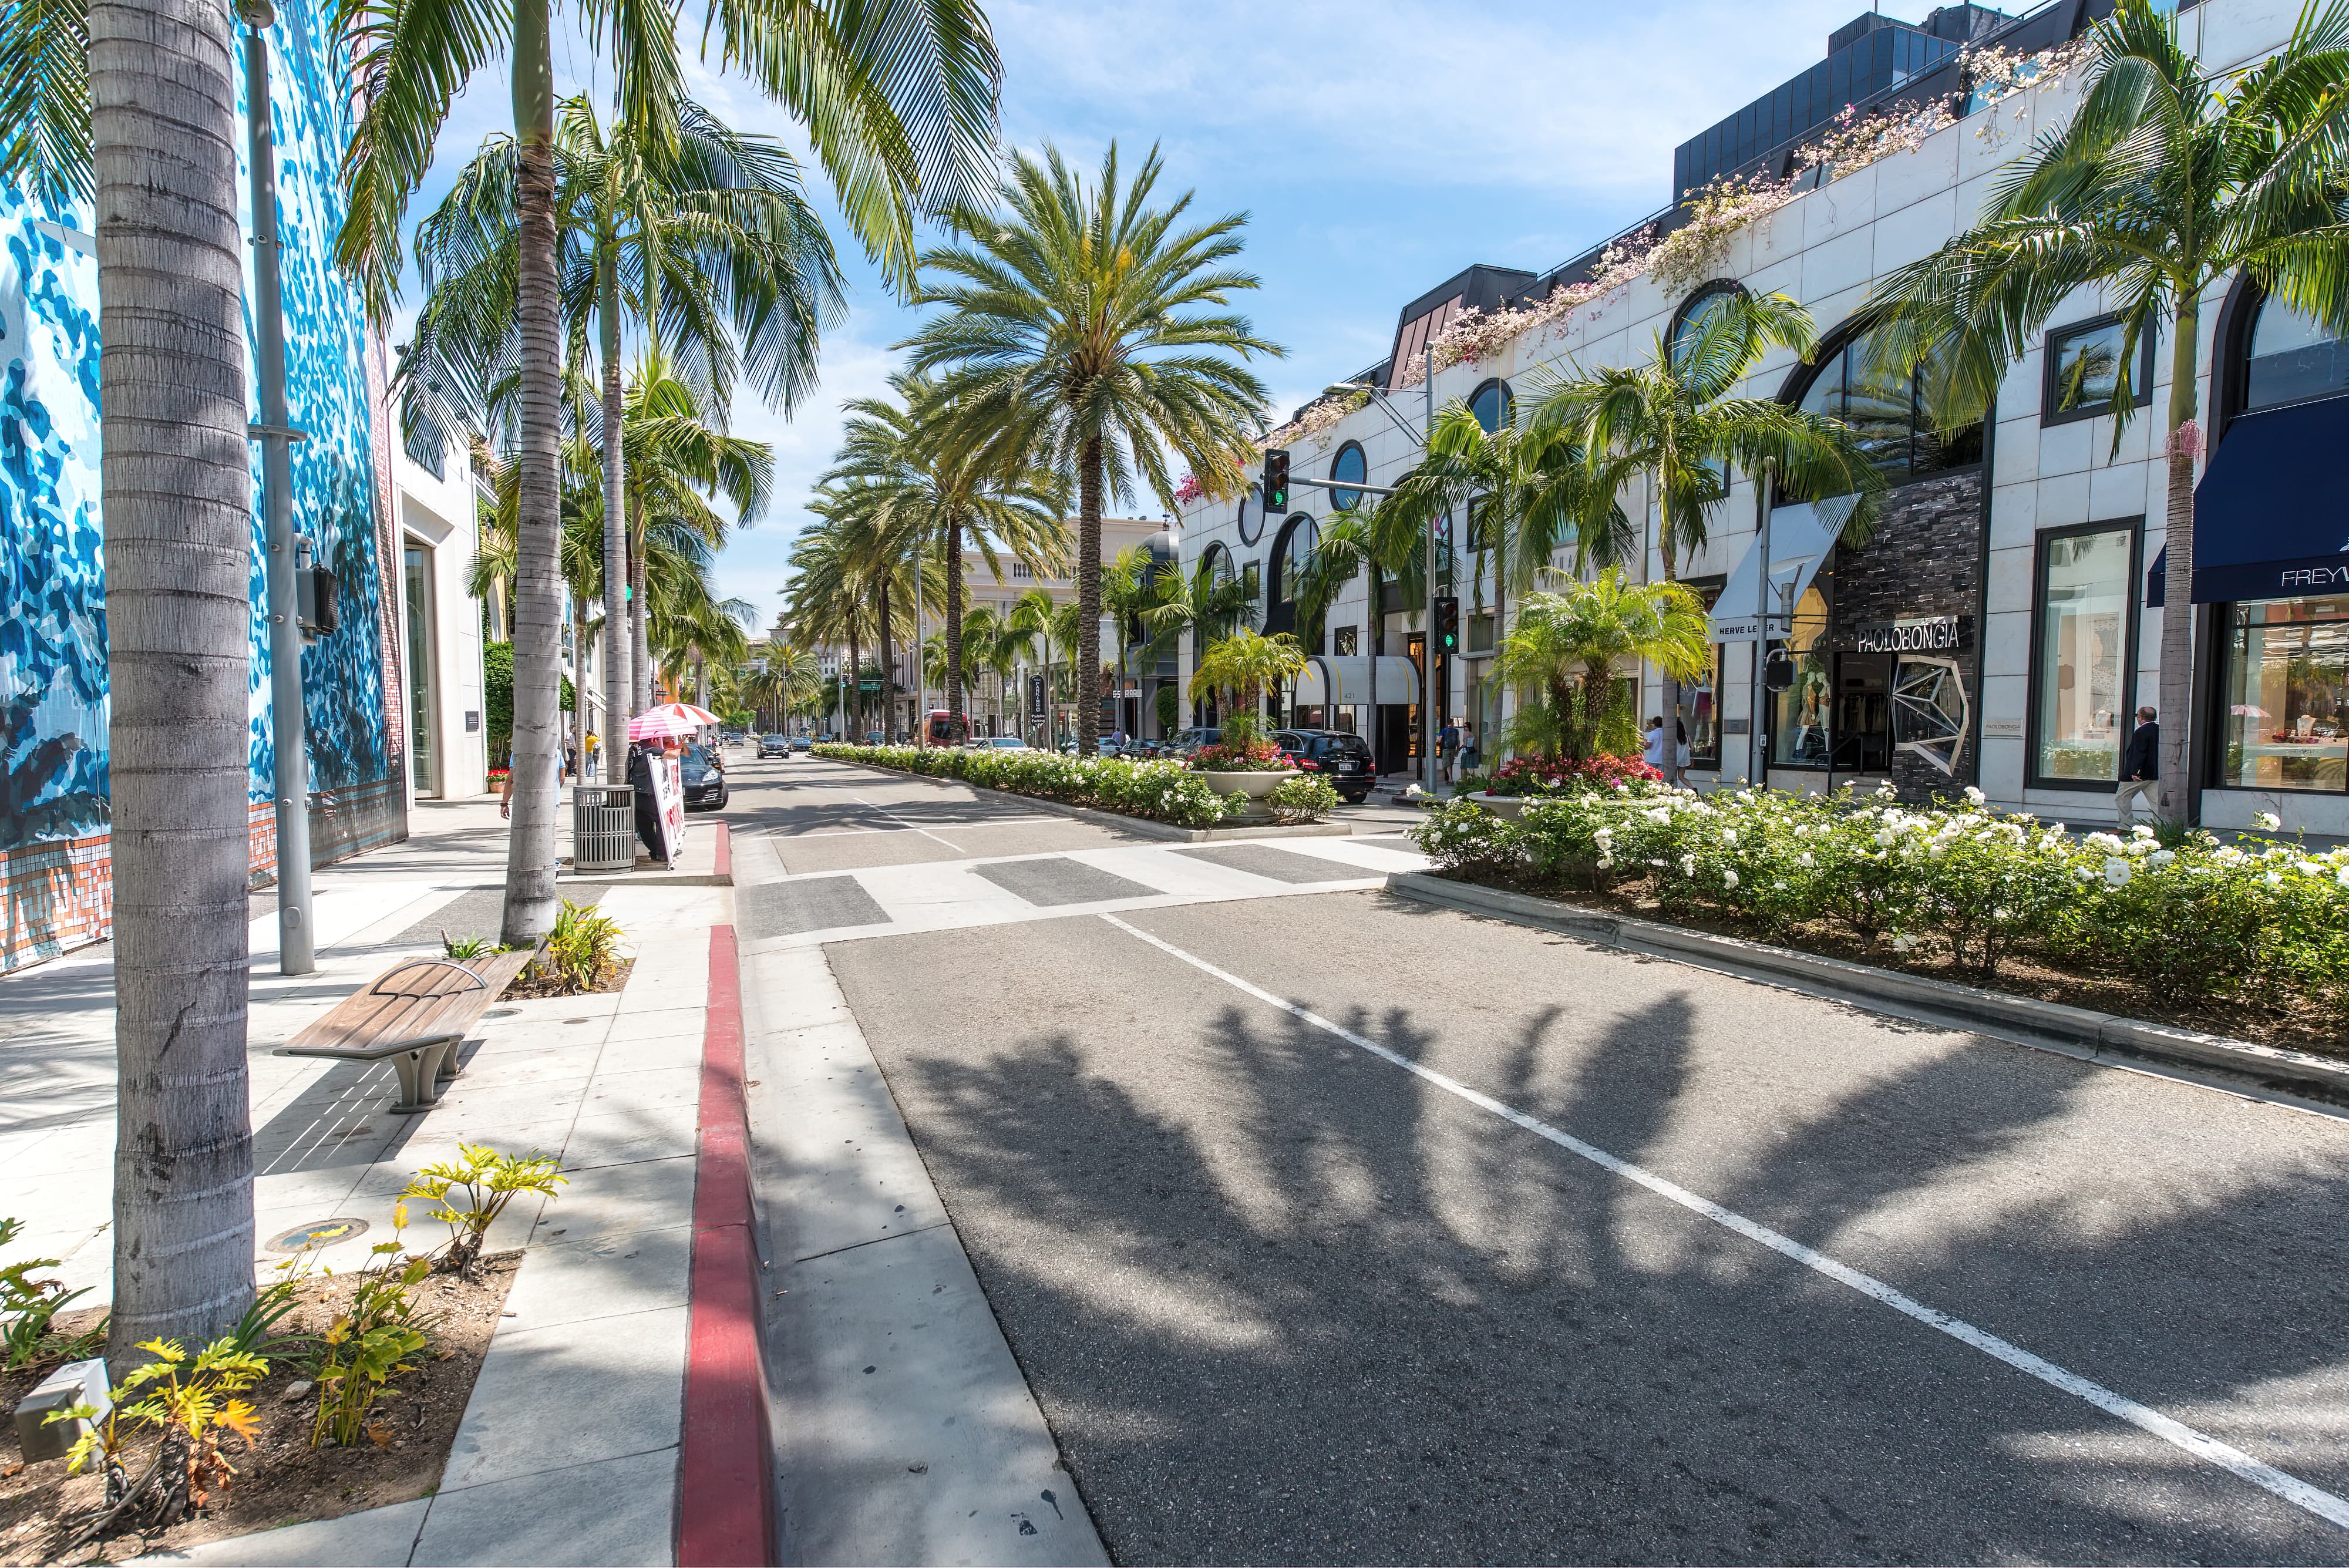 Rodeo Drive lined with palm trees and buildings